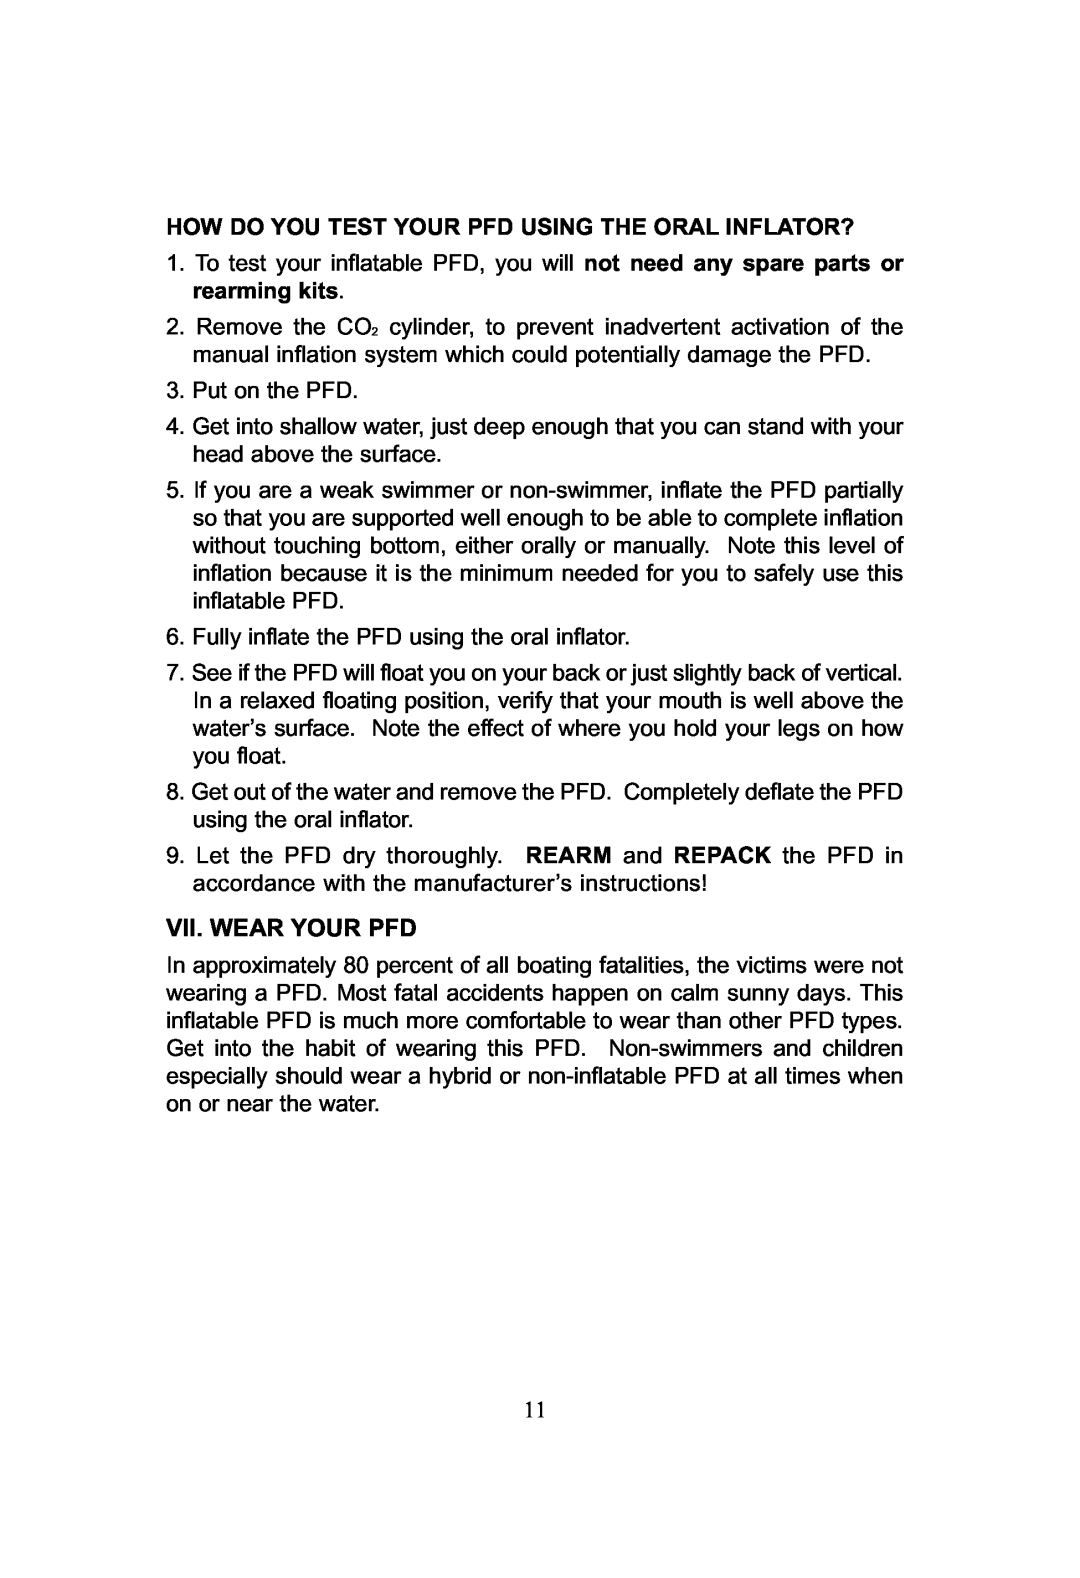 SOSpenders 33MSPT manual Vii. Wear Your Pfd, How Do You Test Your Pfd Using The Oral Inflator? 